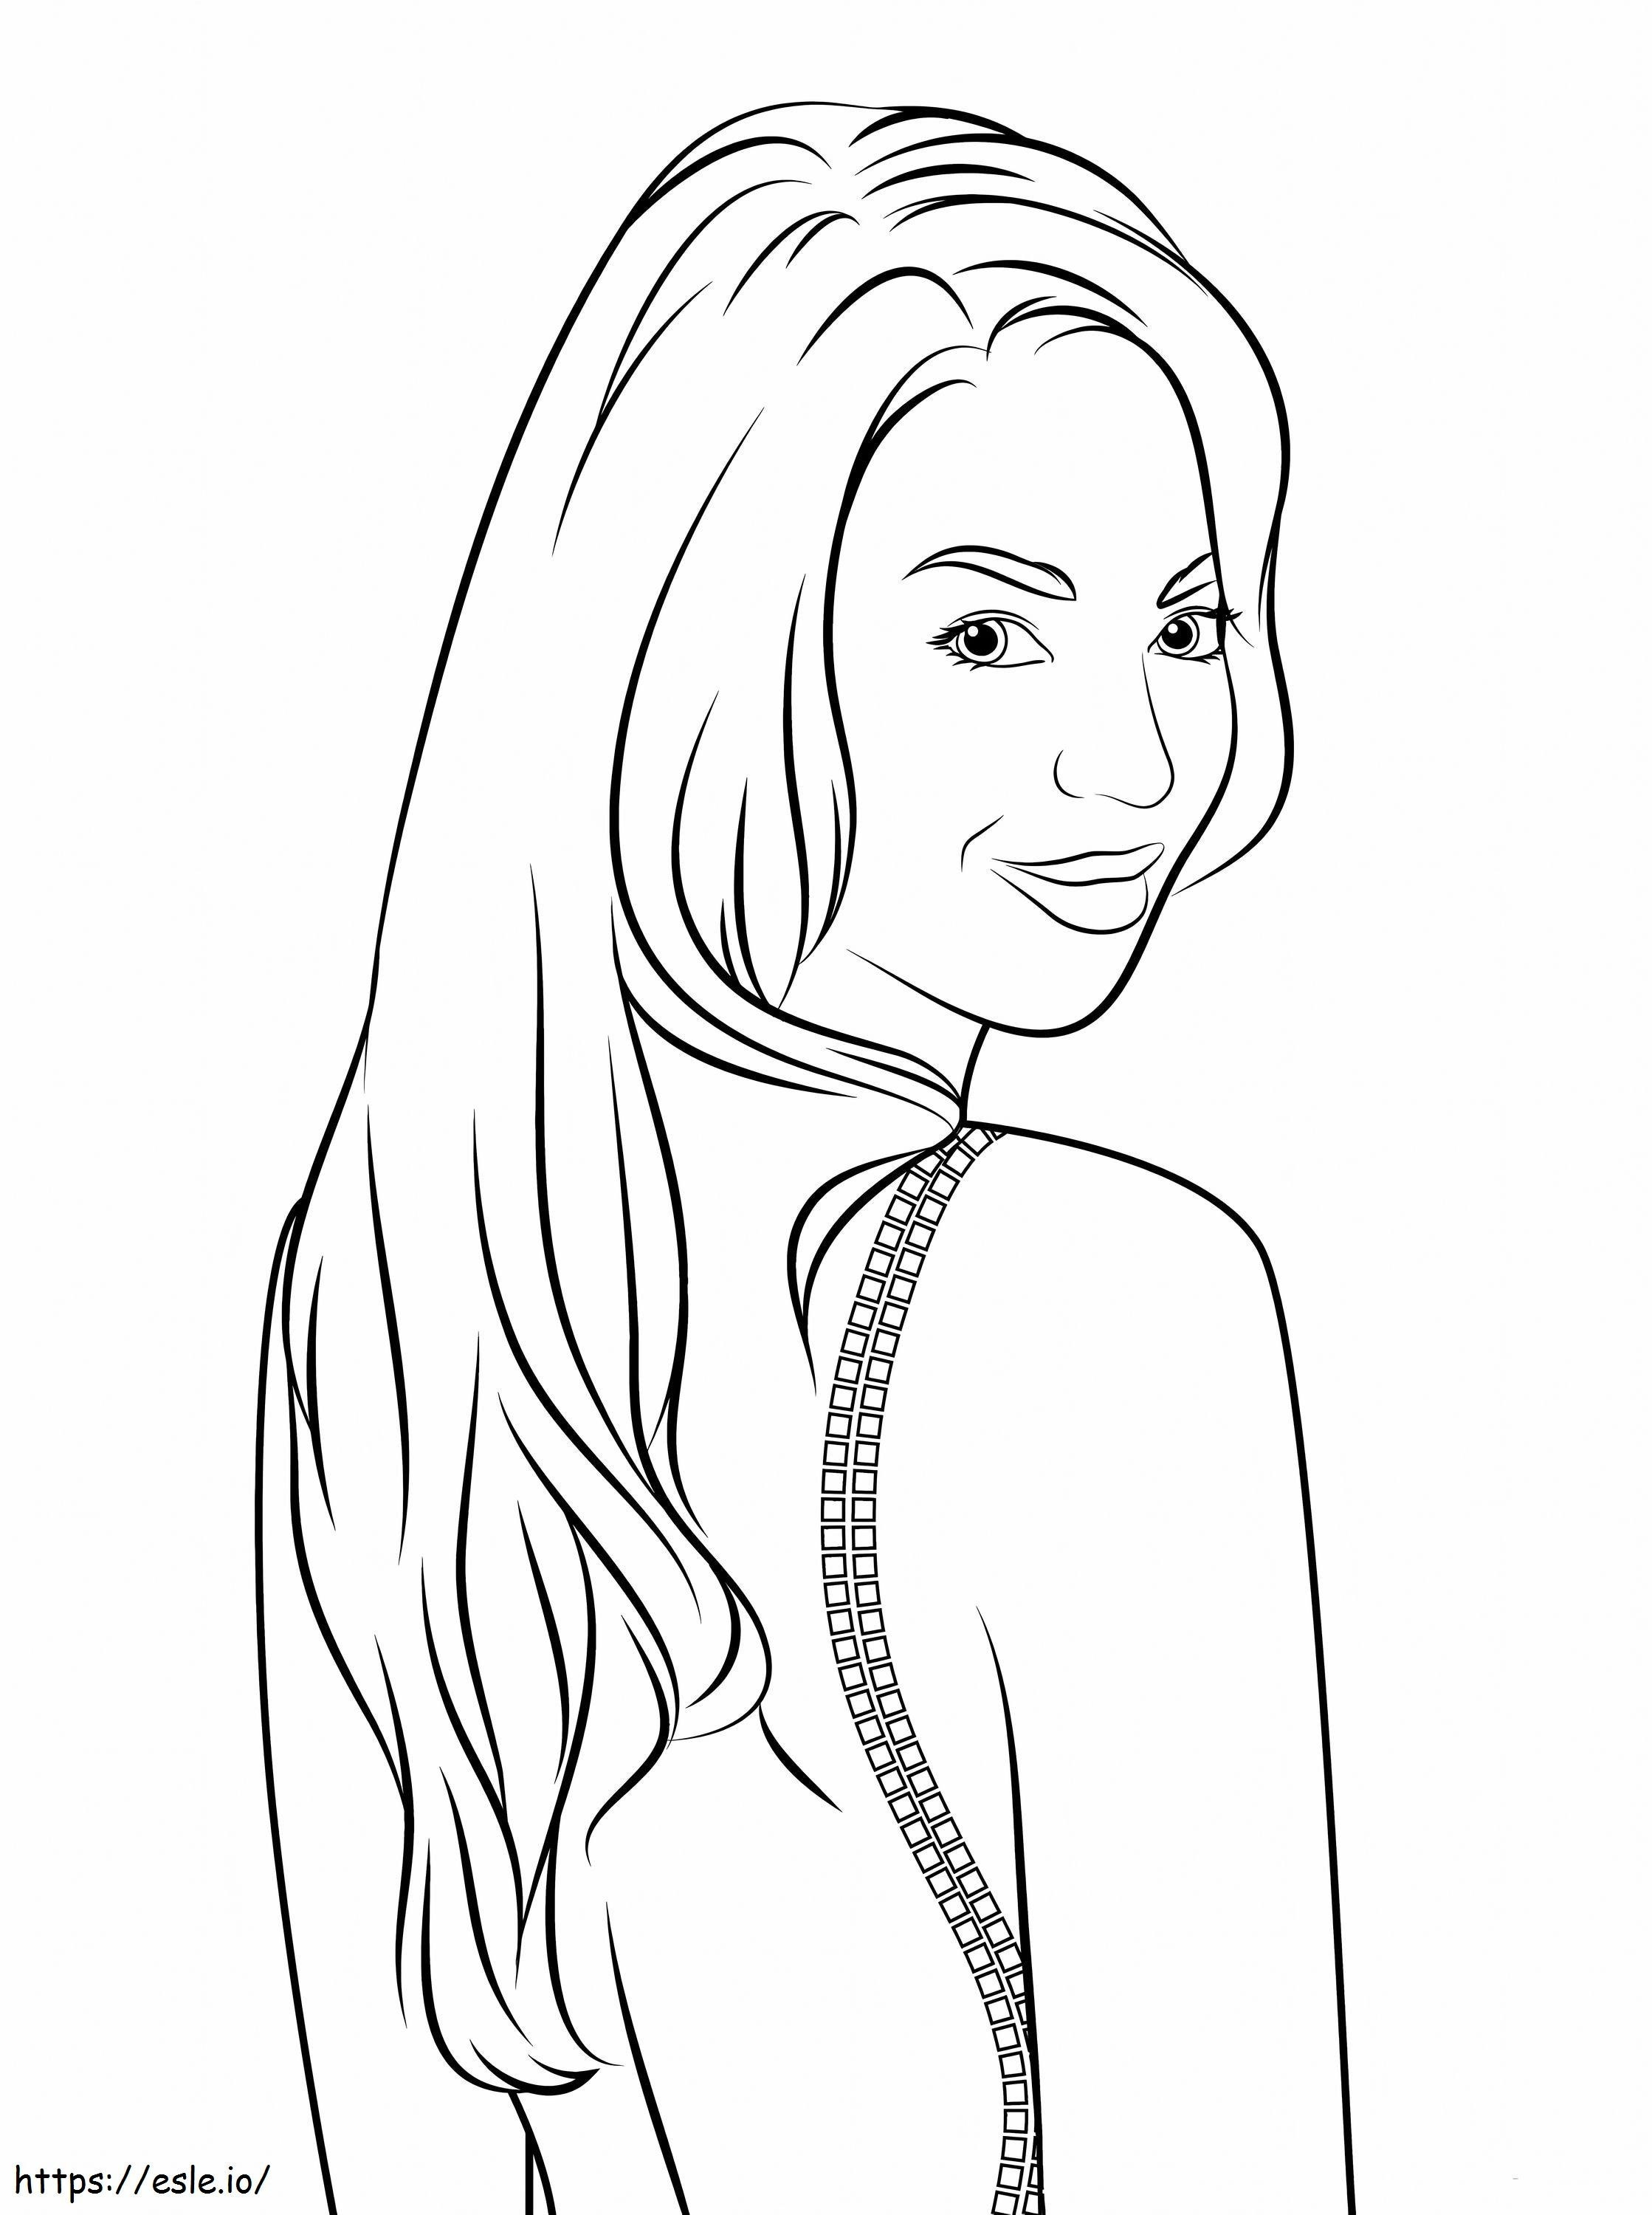 1541500238 Beyonce coloring page